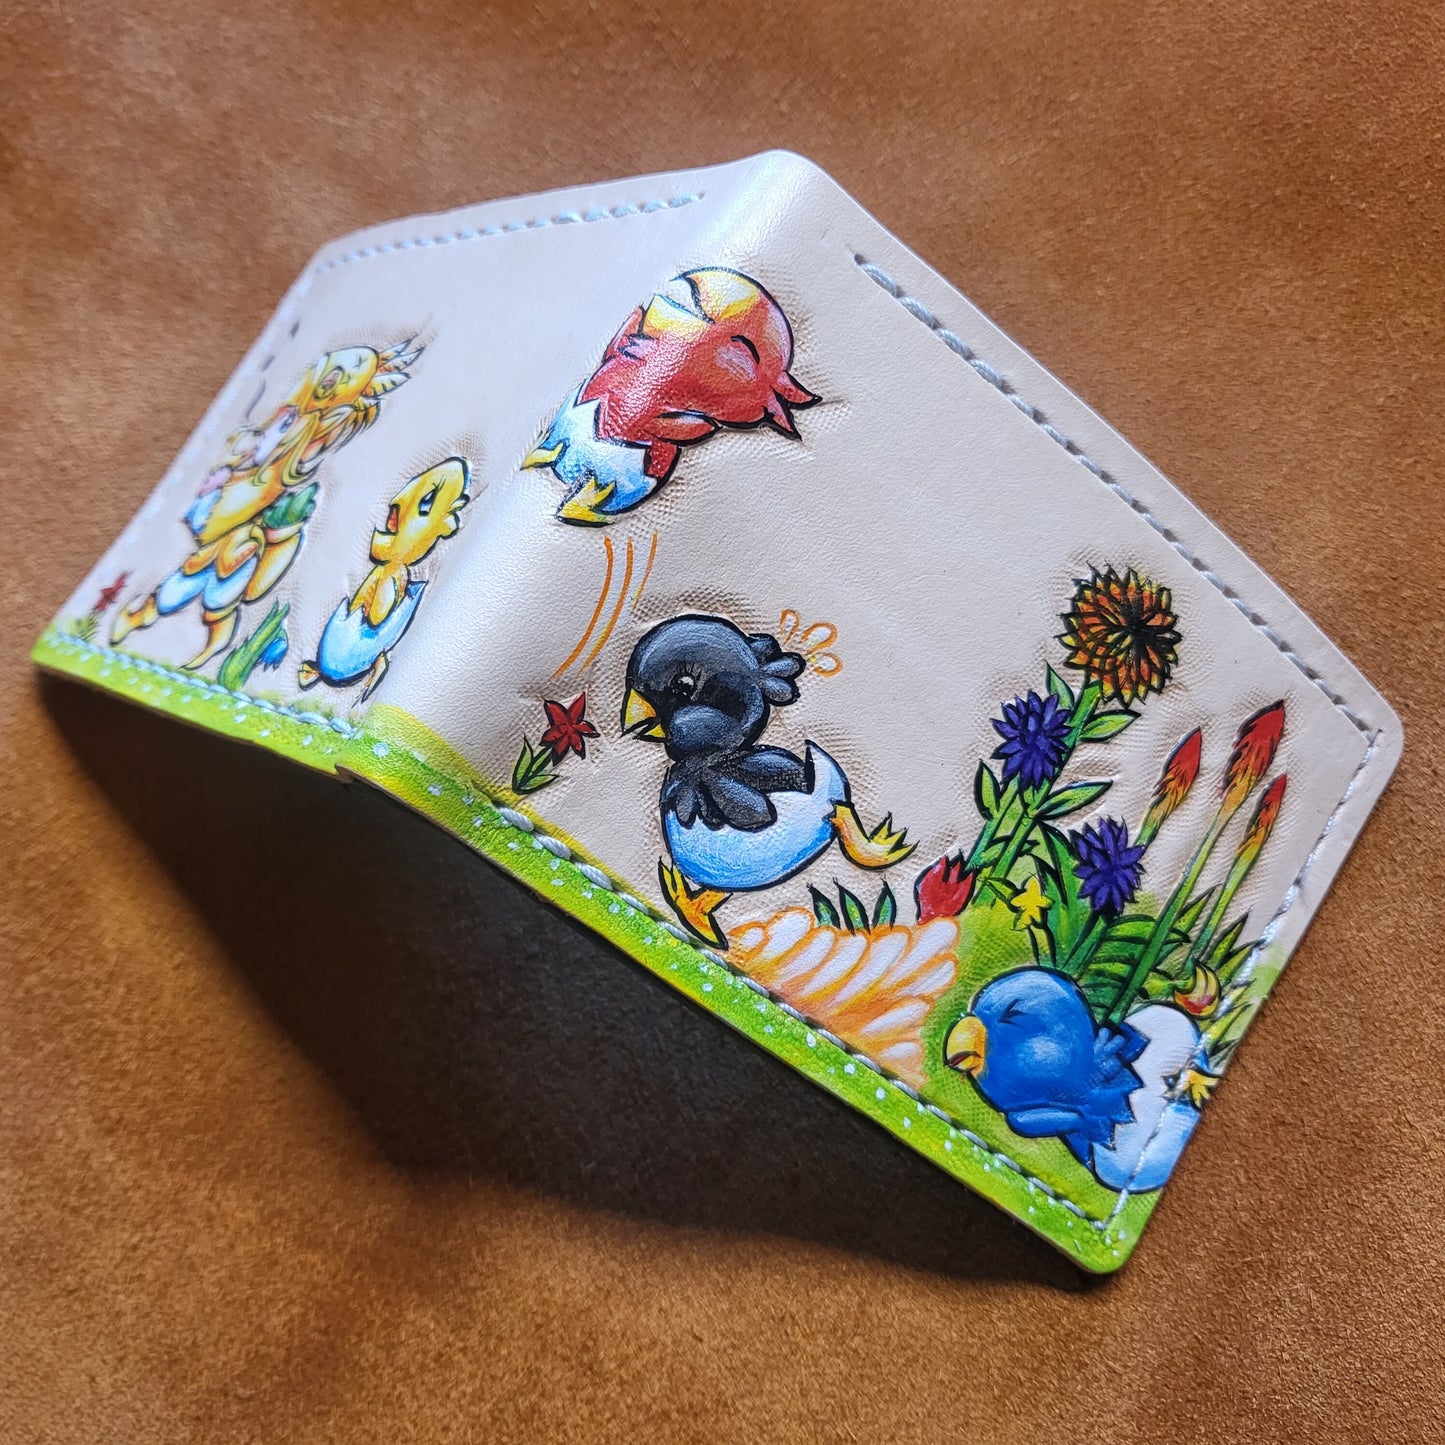 Chocobo Chick March yellow red black blue version - Tan Leather Bifold Wallet - Handcrafted Final Fantasy inspired Wallet - baby